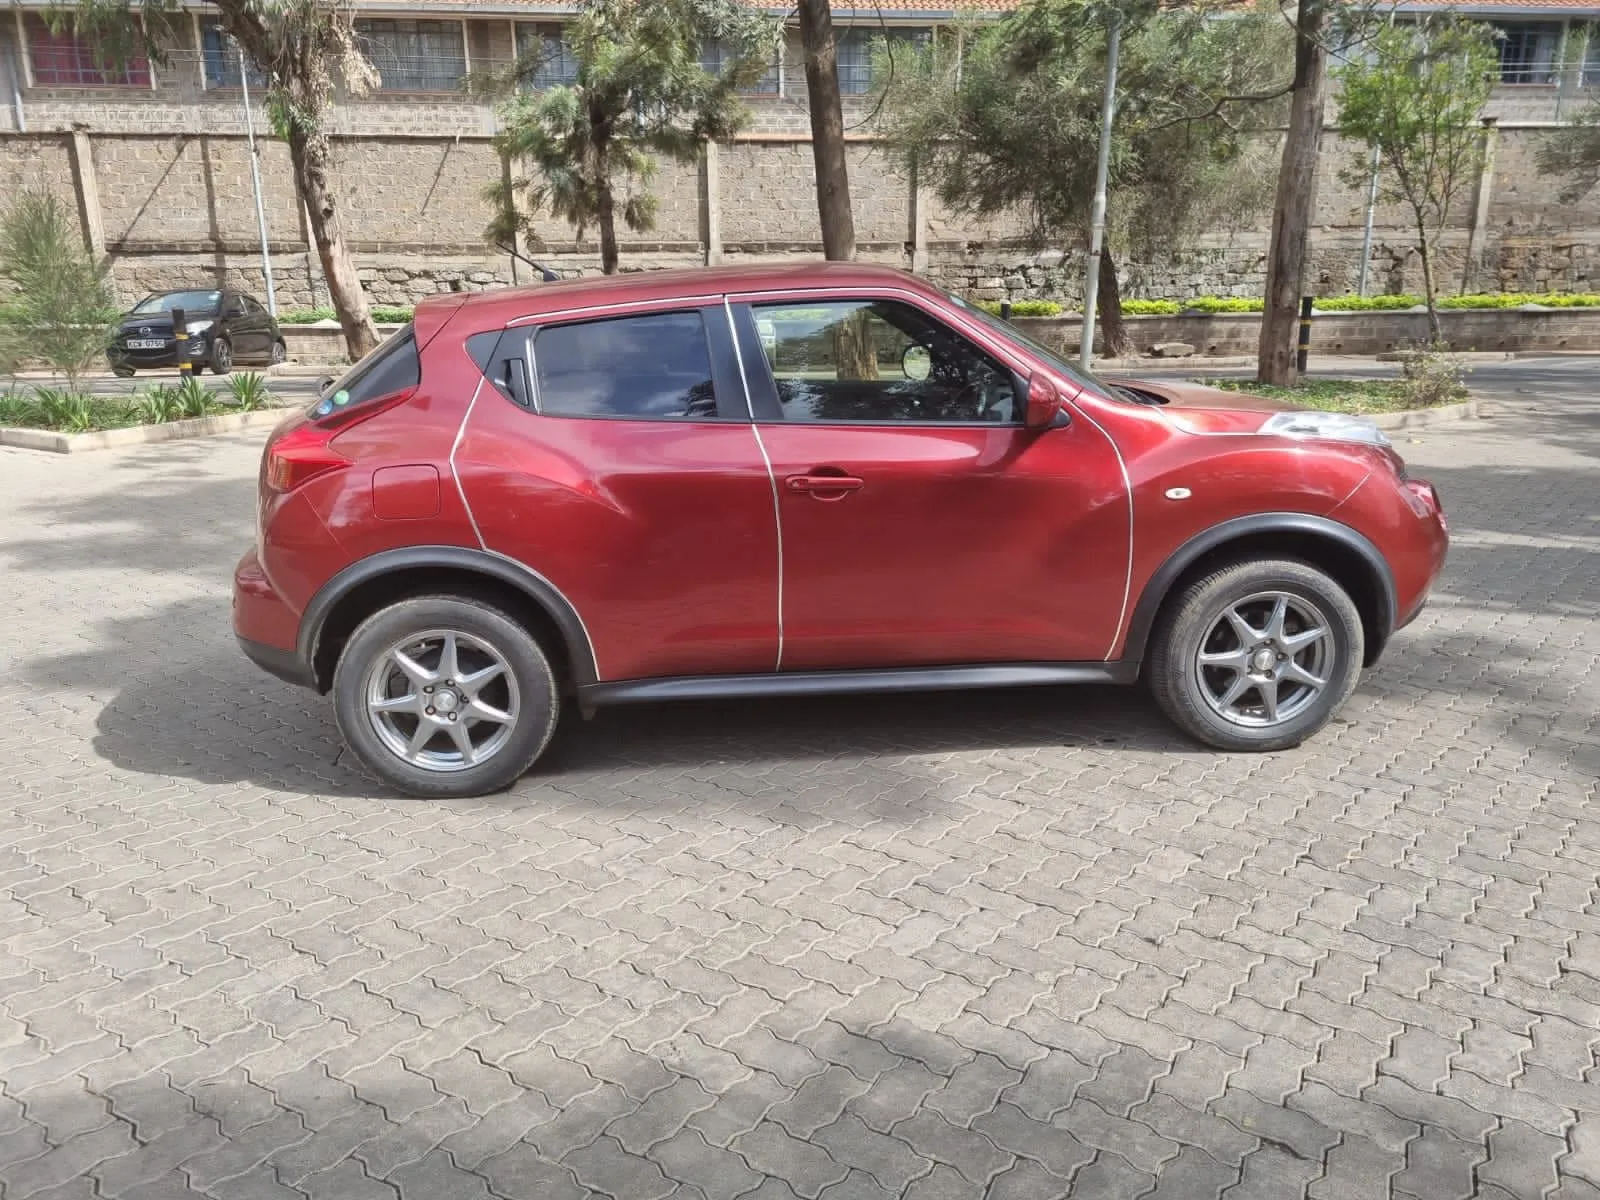 Cars Cars For Sale/Vehicles SUV-Nissan Juke 2013 Pay 30% Balance in 60 months. Cheapest New 7